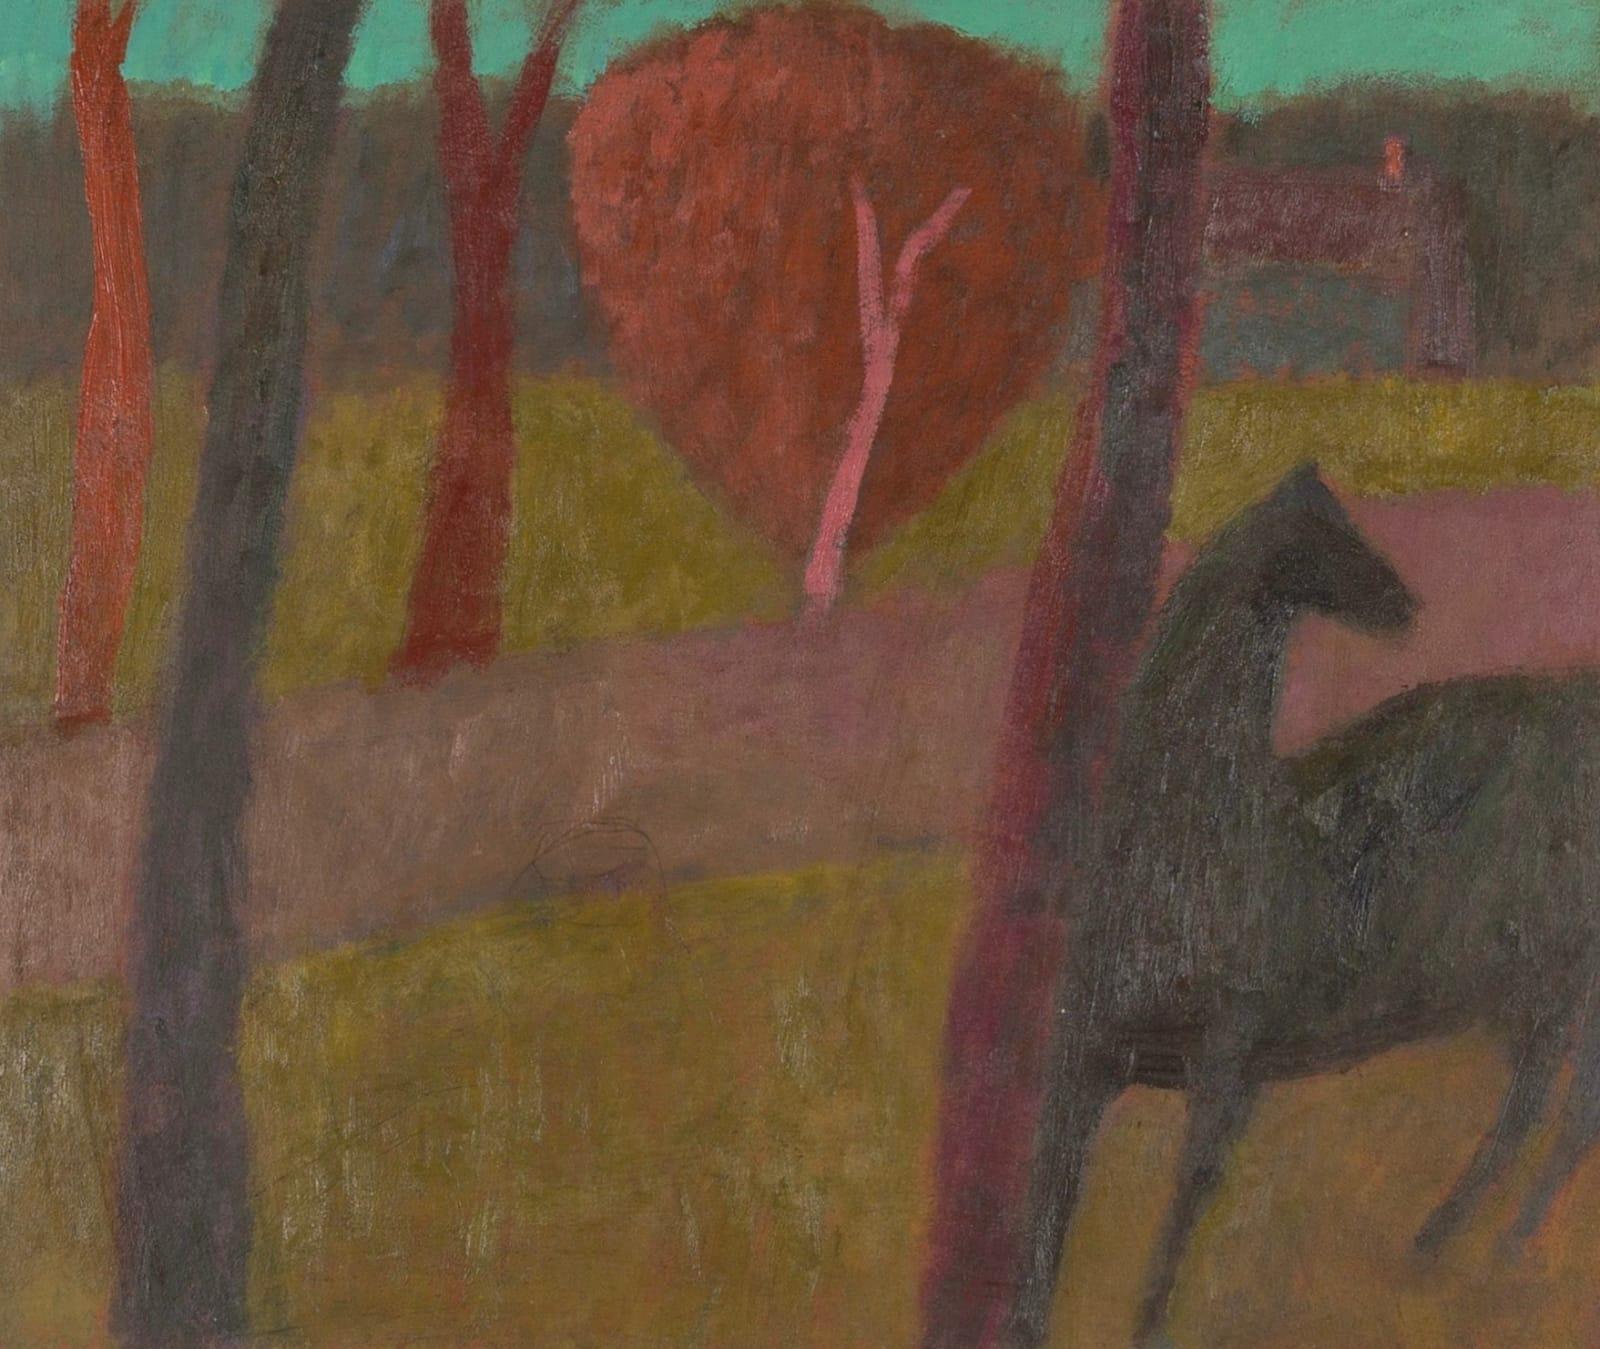 Horse Under Trees Painting by Nicholas Turner B. 1972, 2022-23

Additional information:
Medium: Oil on board
Dimensions: 25.4 x 30.5 cm
10 x 12 in
Signed, dated and titled verso.

Nicholas Turner is a painter of quiet compositions that are